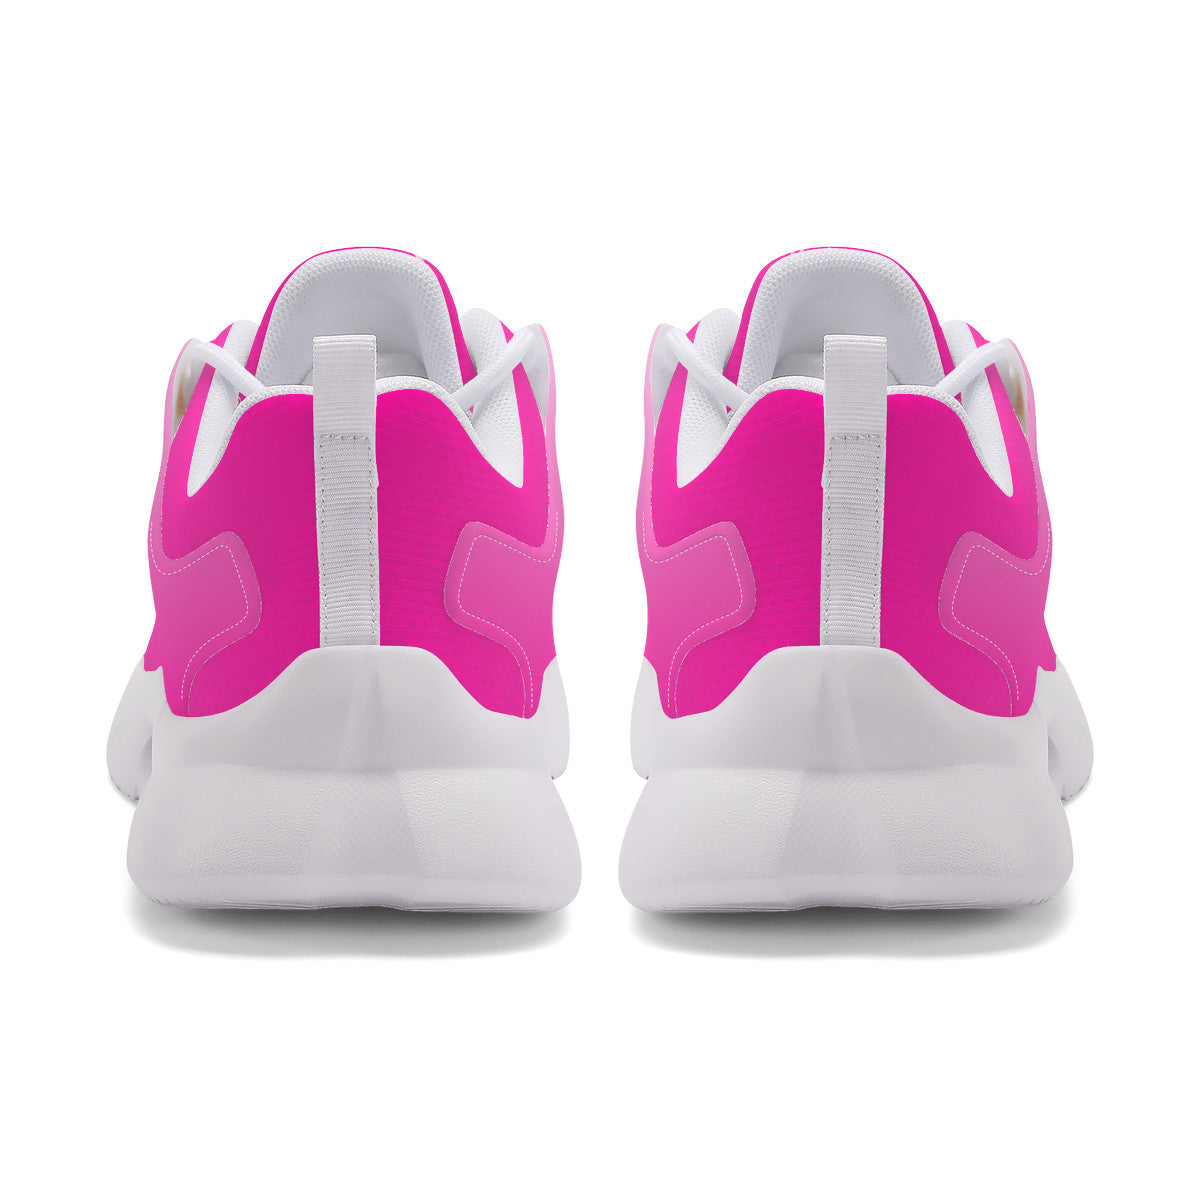 Workout Shoes - Move - Pink